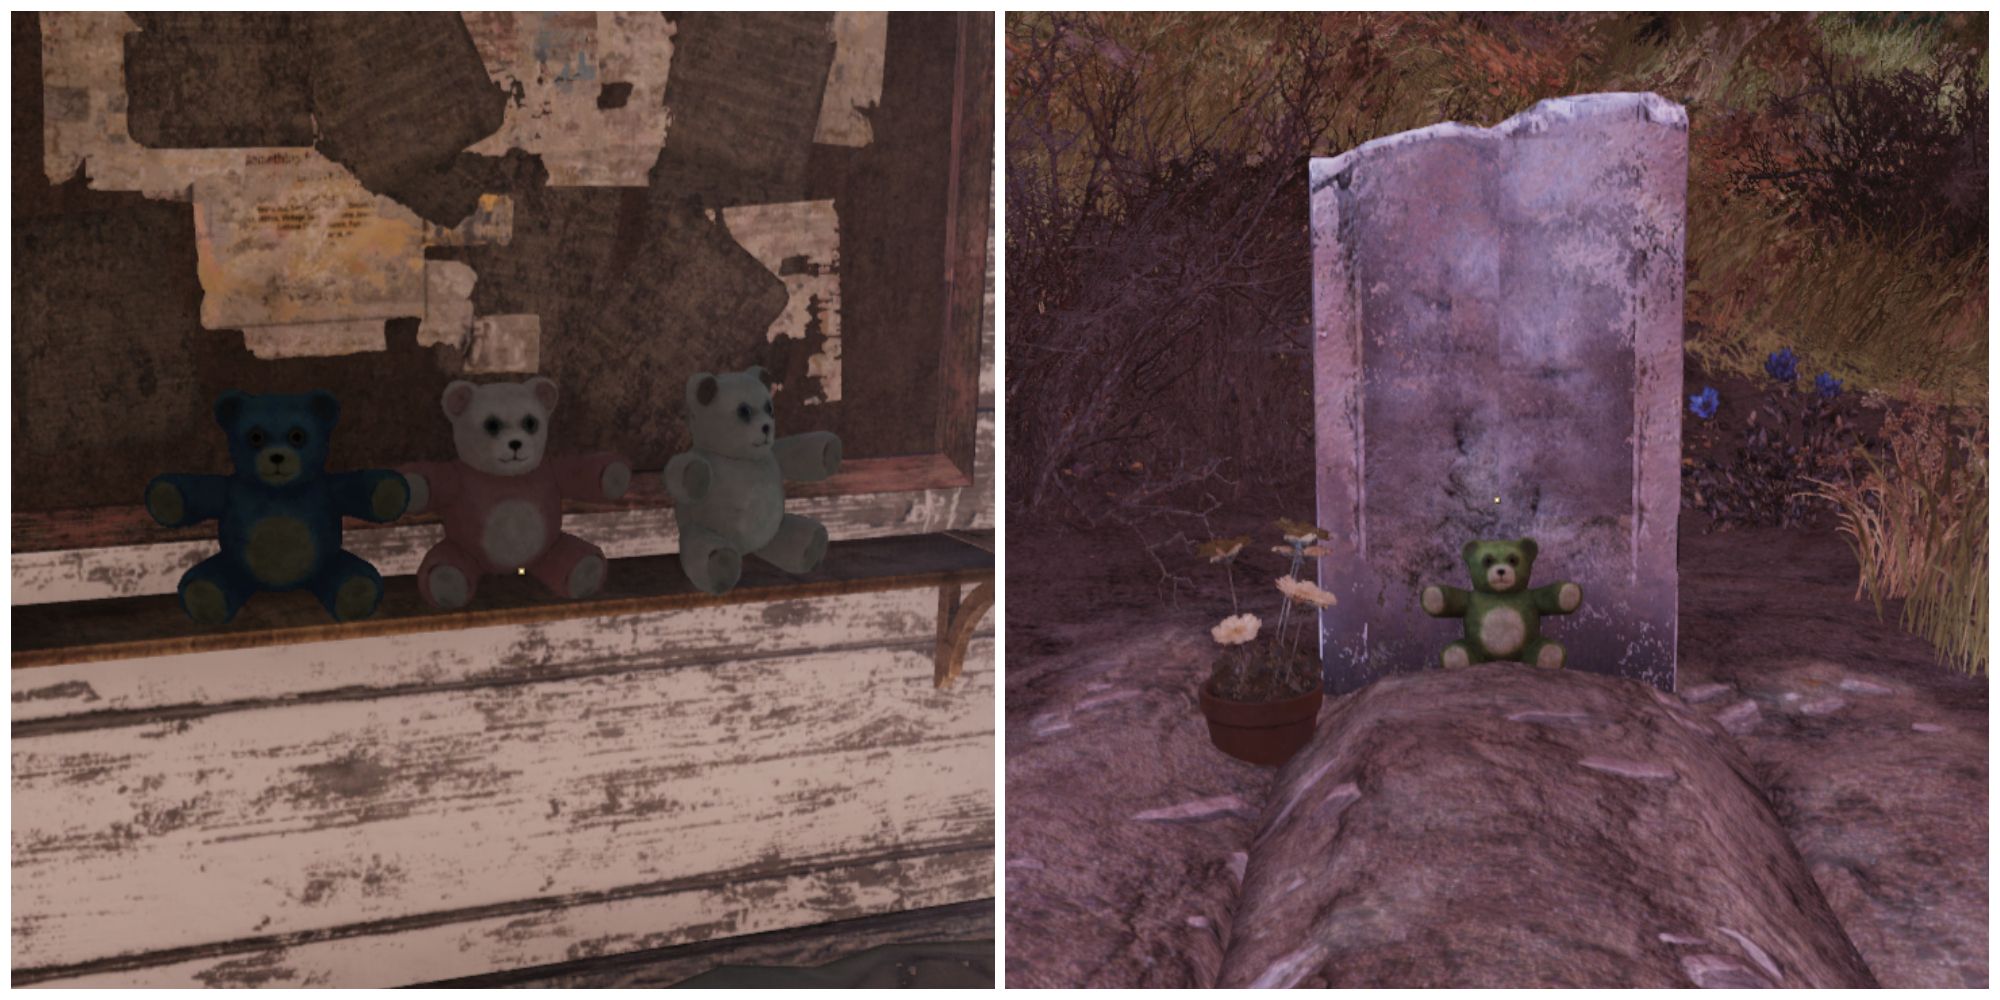 Split image of three teddy bears on a shelf and a teddy bear in front of a grave in Fallout 76